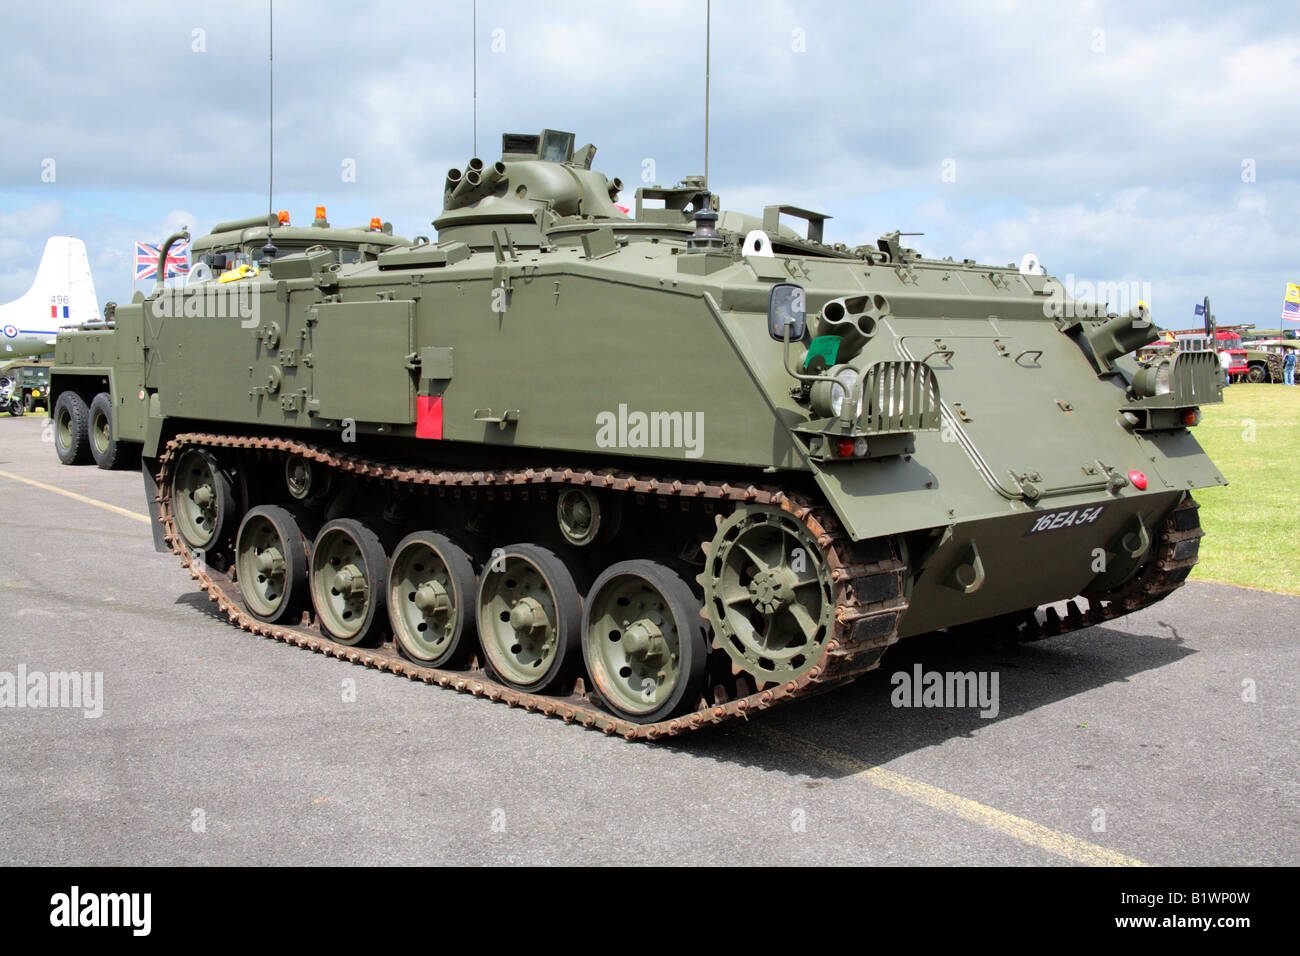 Armored Personnel Carrier Tracked